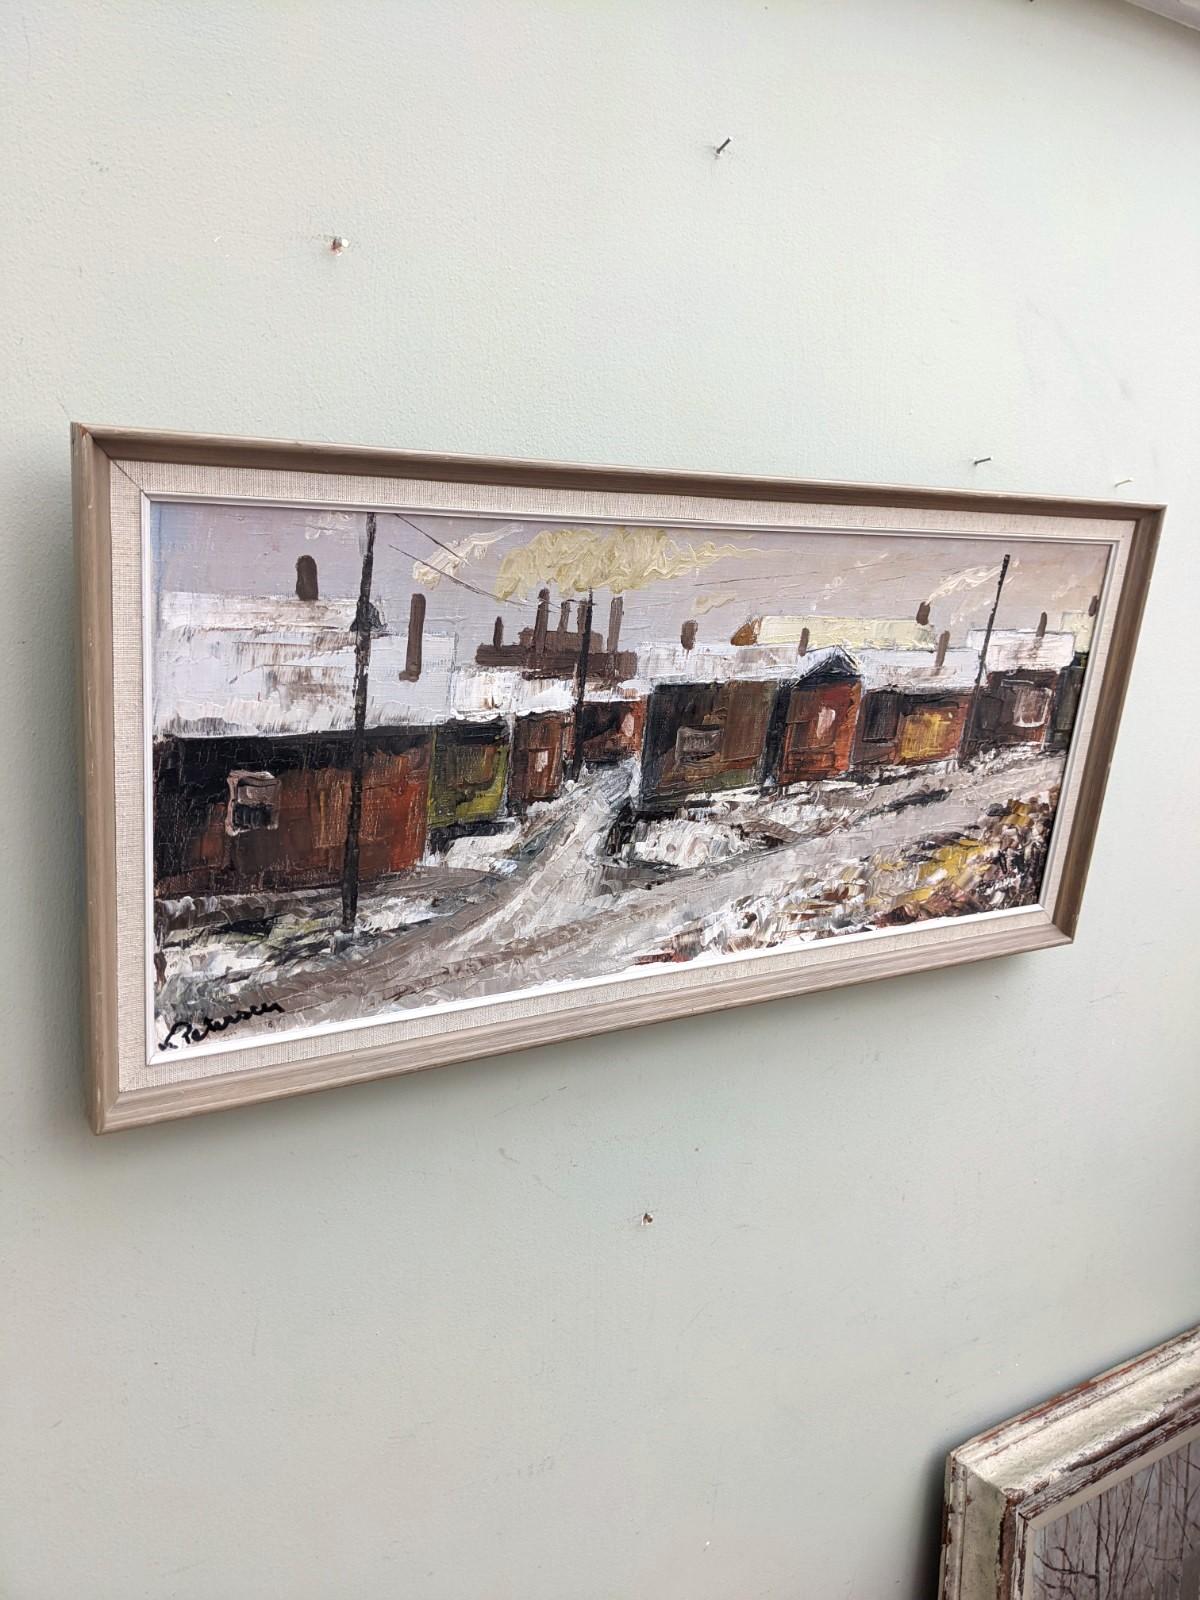 Chimneys
Oil on canvas
Size: 31 x 66 cm (including frame)

A very well executed mid century modernist winter street scene composition in oil, painted onto canvas.

This charming streetscape features a very textured surface, with several areas of